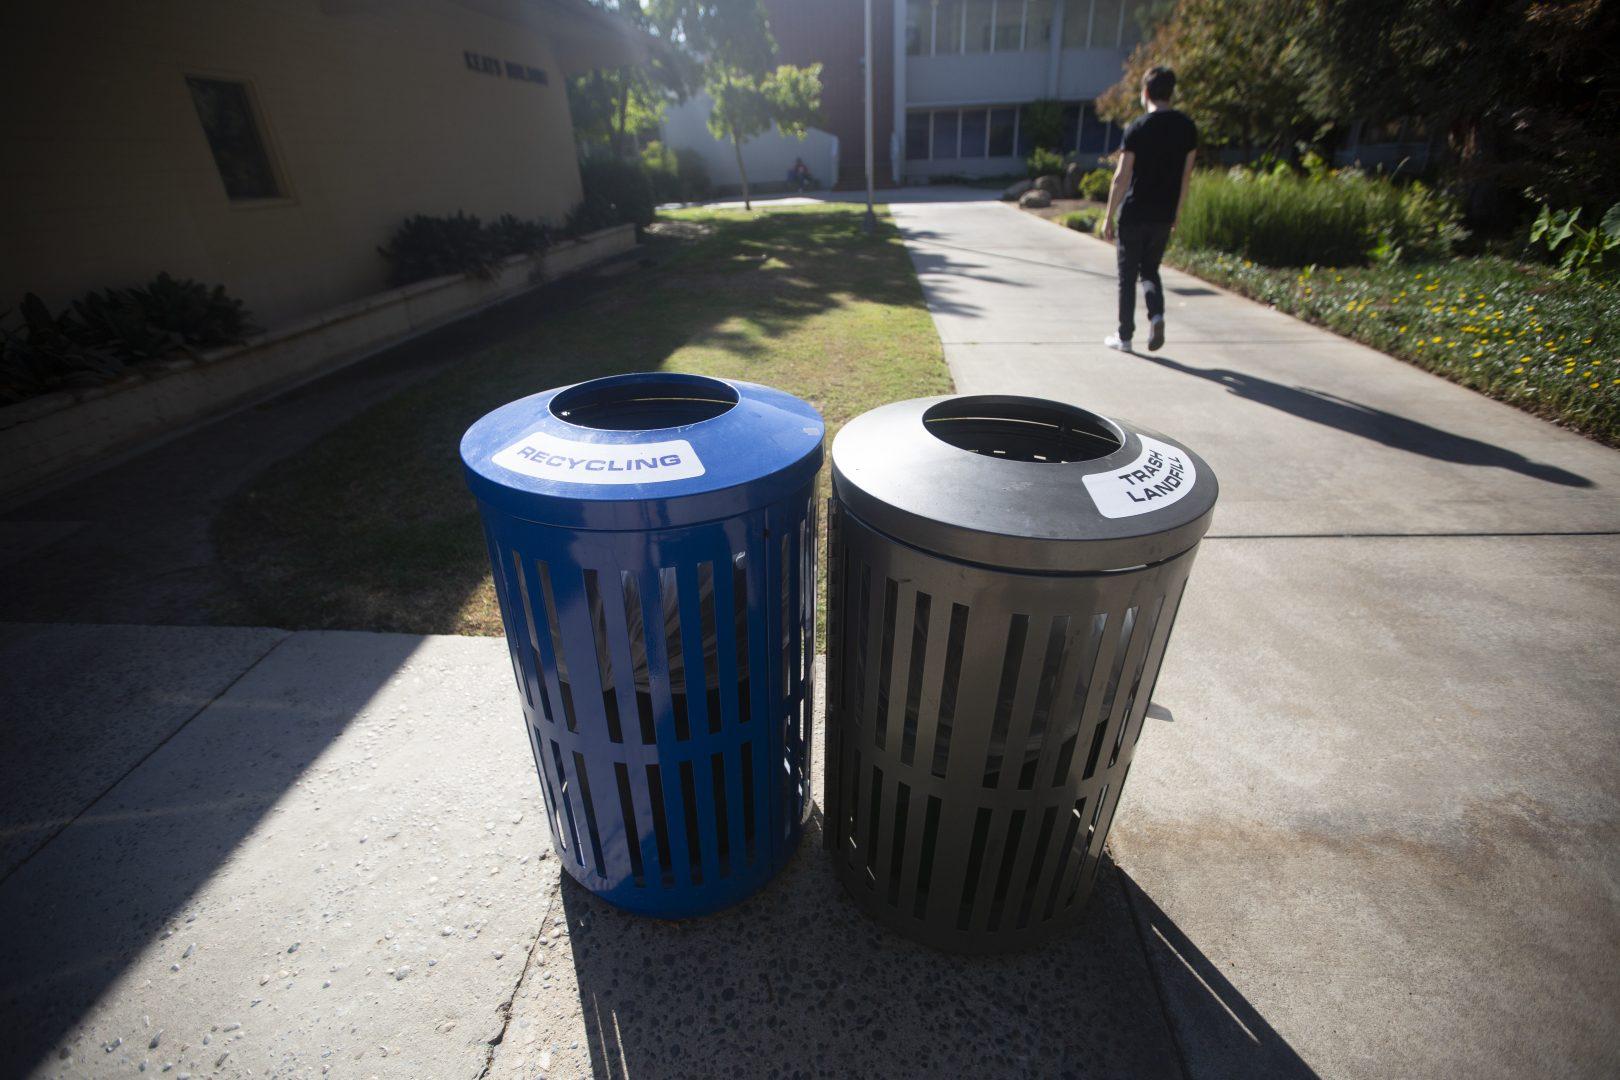 Take responsibility in keeping your campus clean